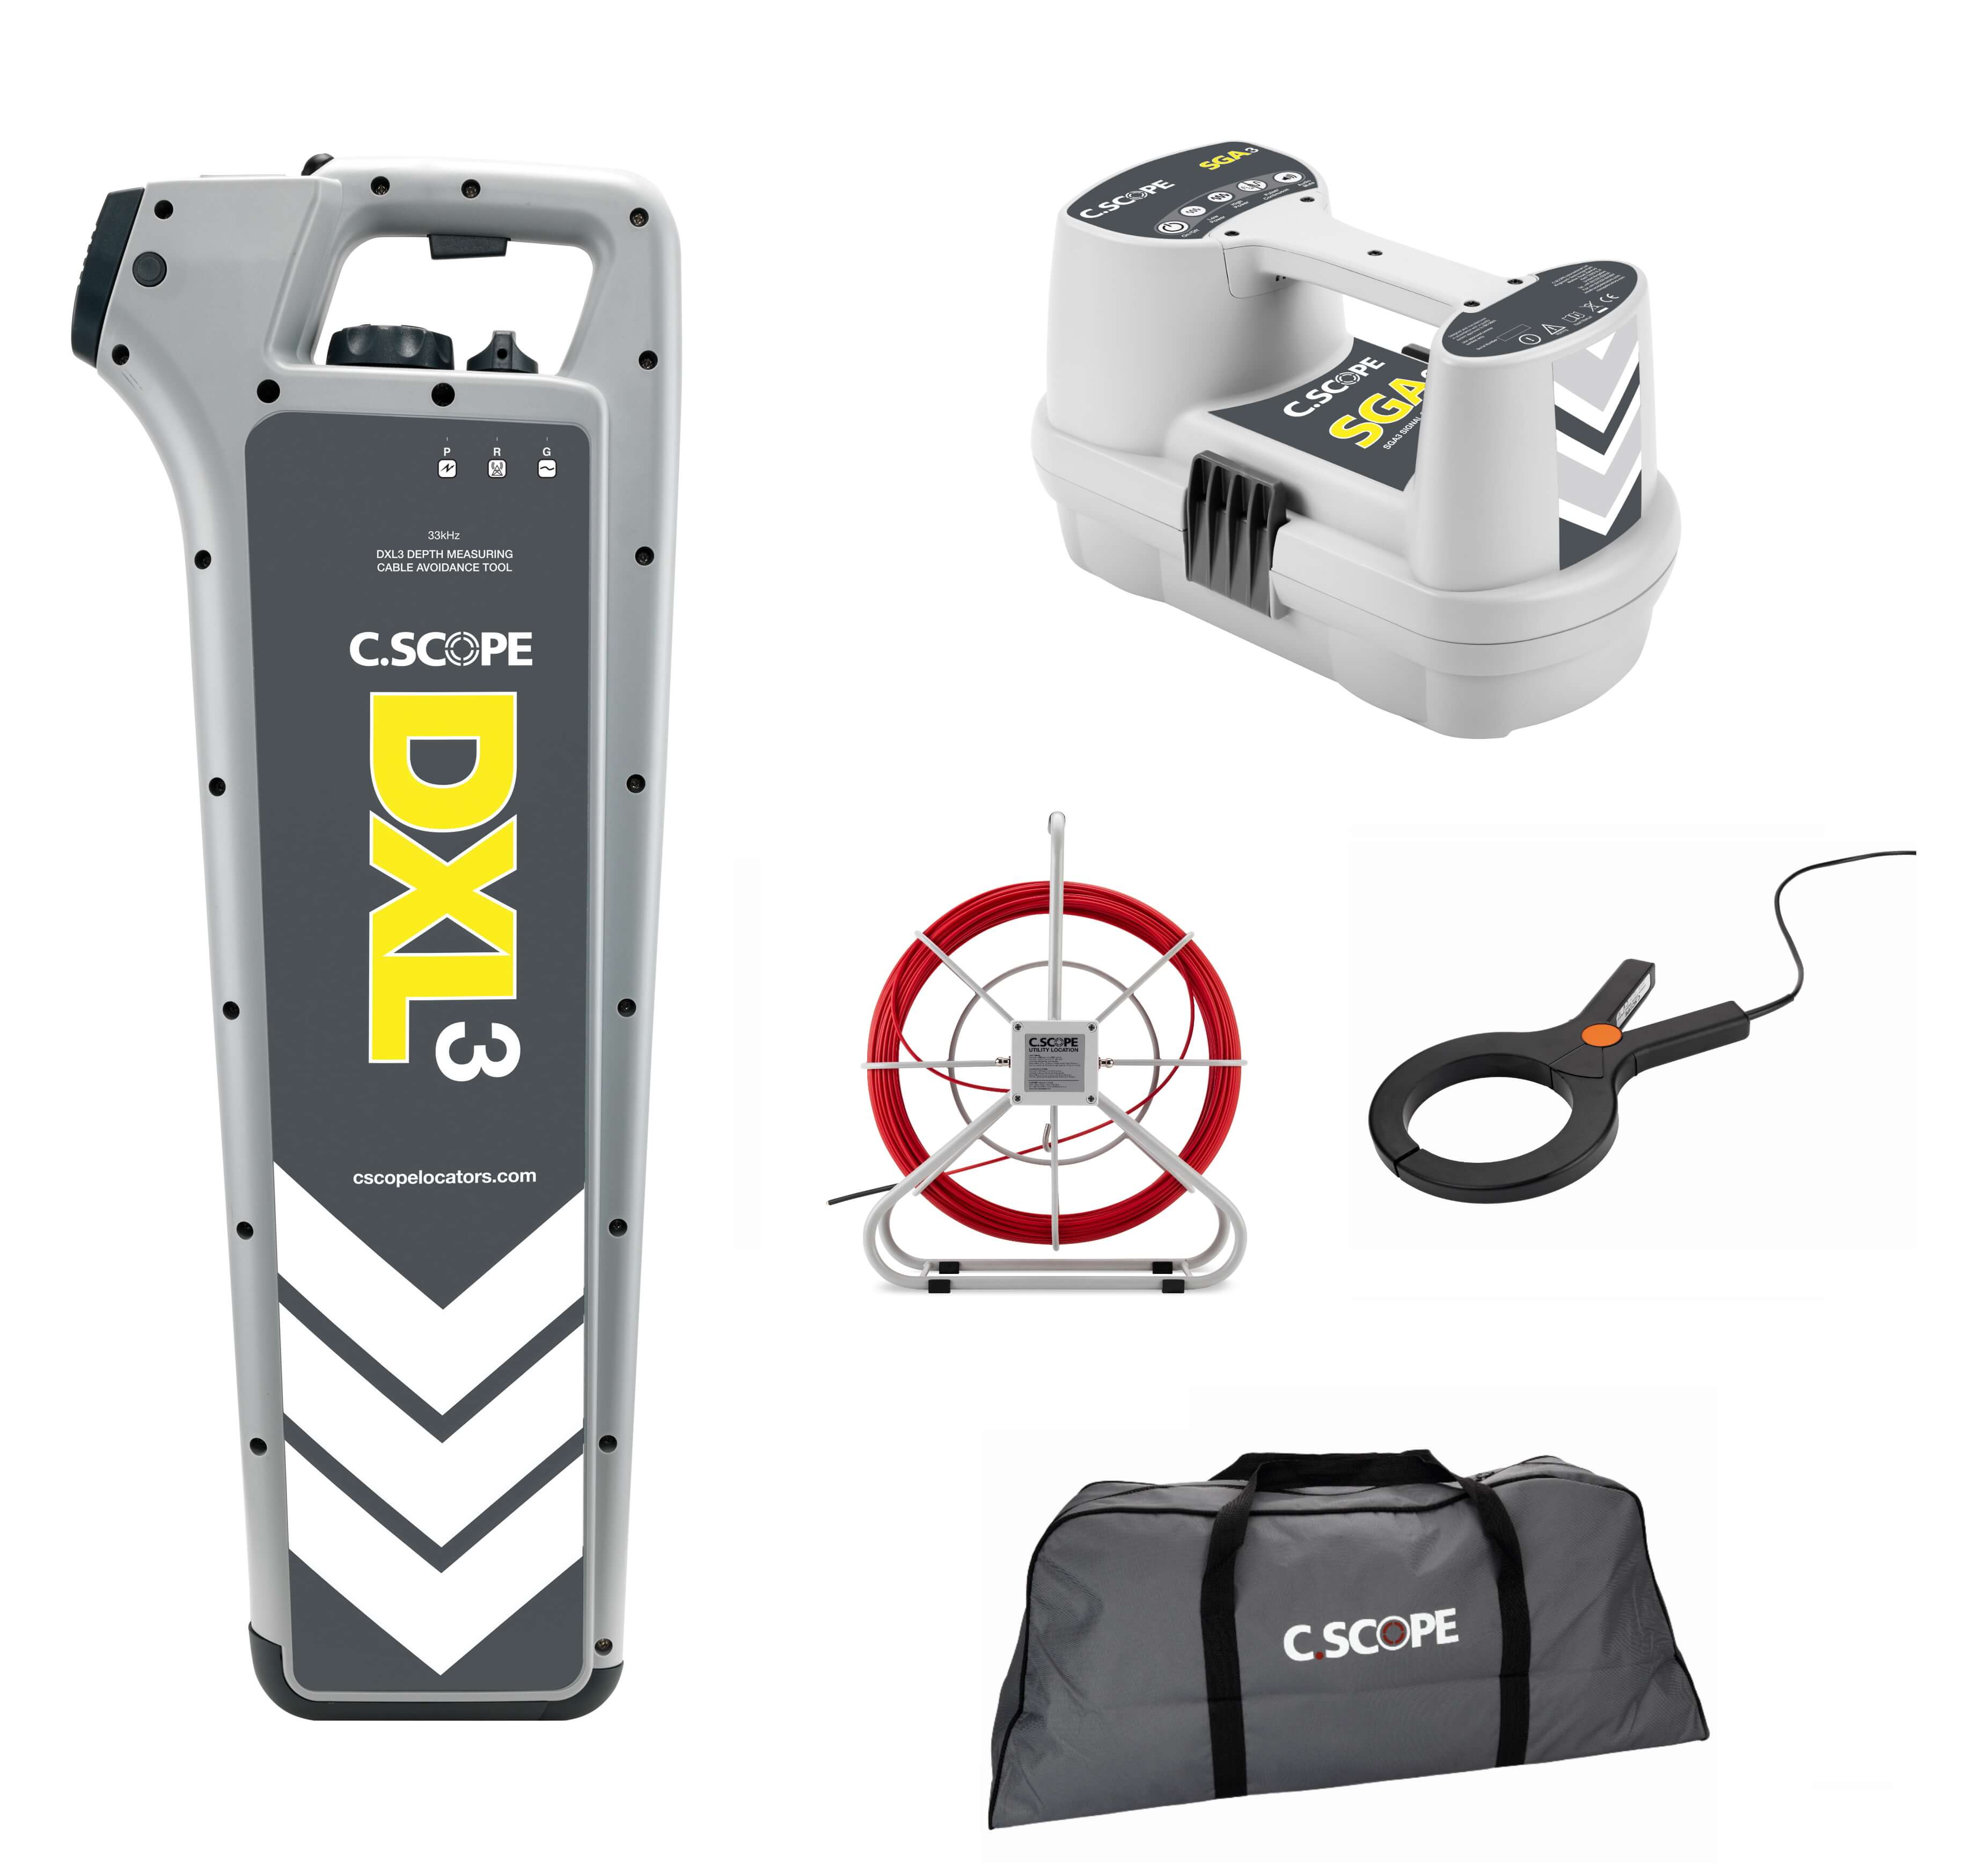 C.Scope DXL3 Top Value Builders Kit with SGA3 Signal Generator and Soft bag - Cable Detector Calibration & Sales